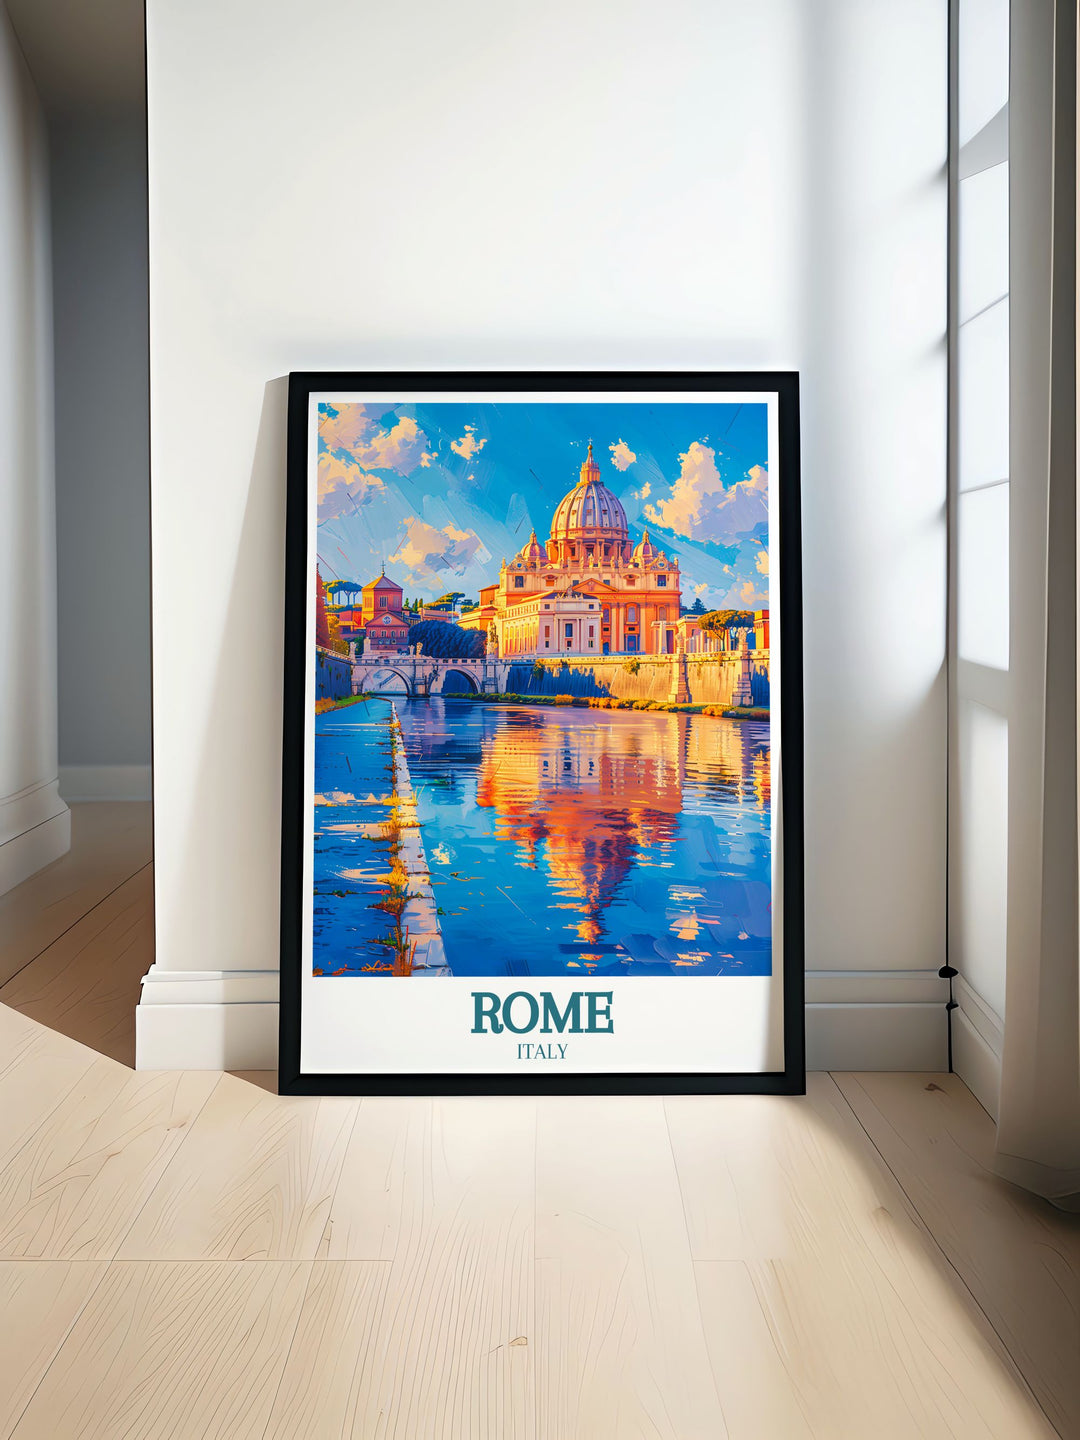 Stunning black and white Rome print featuring St Basilica Vatican City perfect for home decor and gifts including anniversaries birthdays and Christmas adding a touch of elegance to any space with fine line details and timeless appeal.